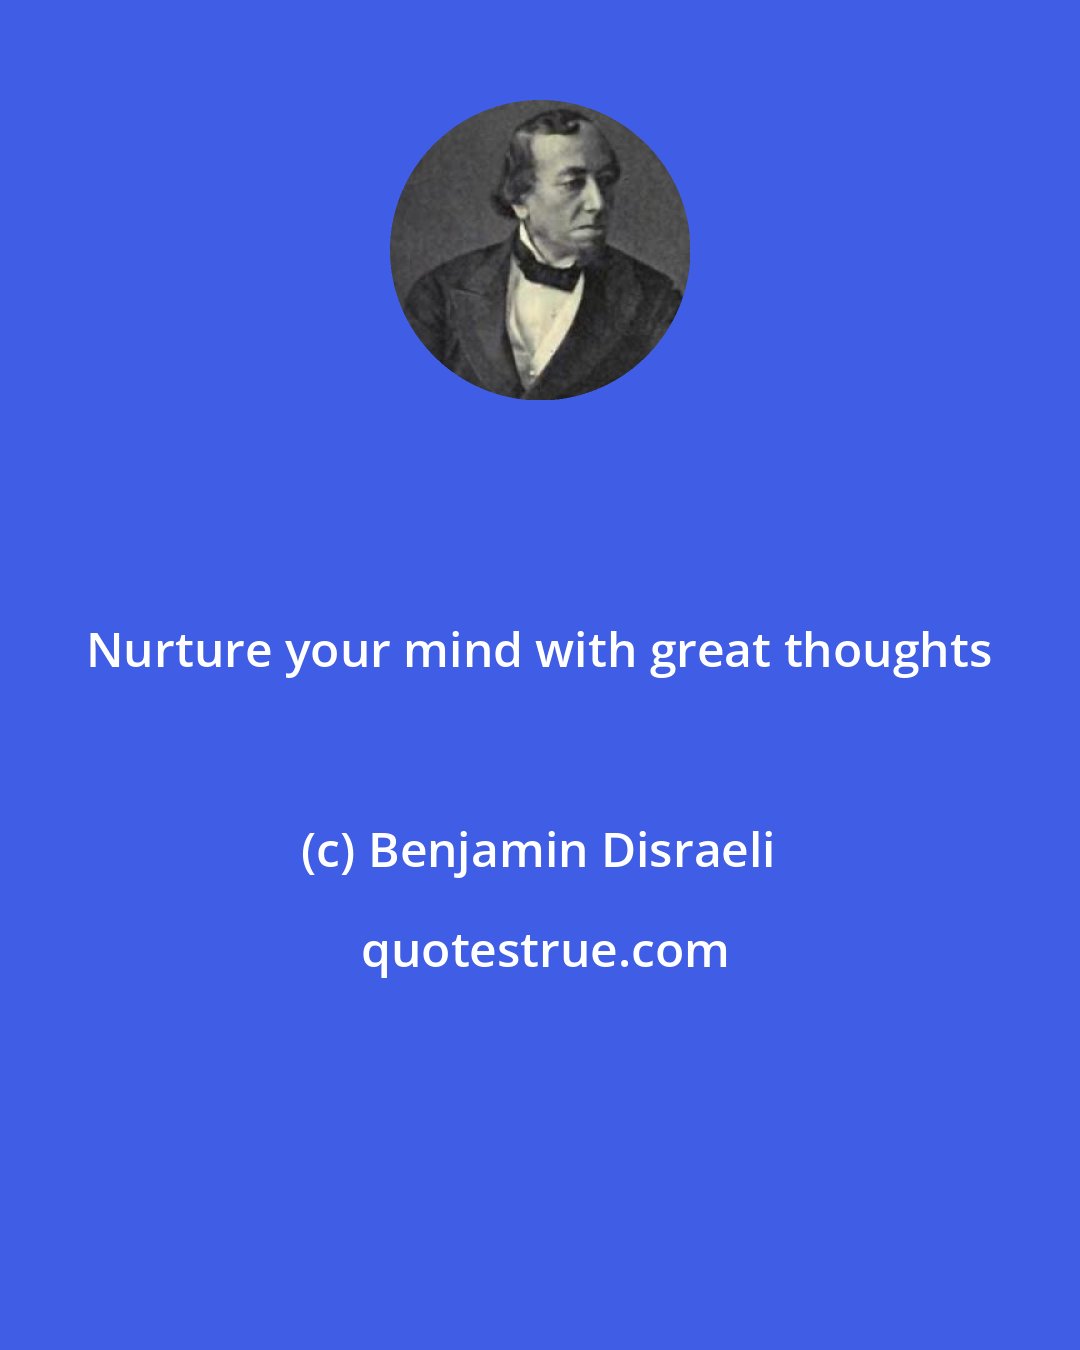 Benjamin Disraeli: Nurture your mind with great thoughts